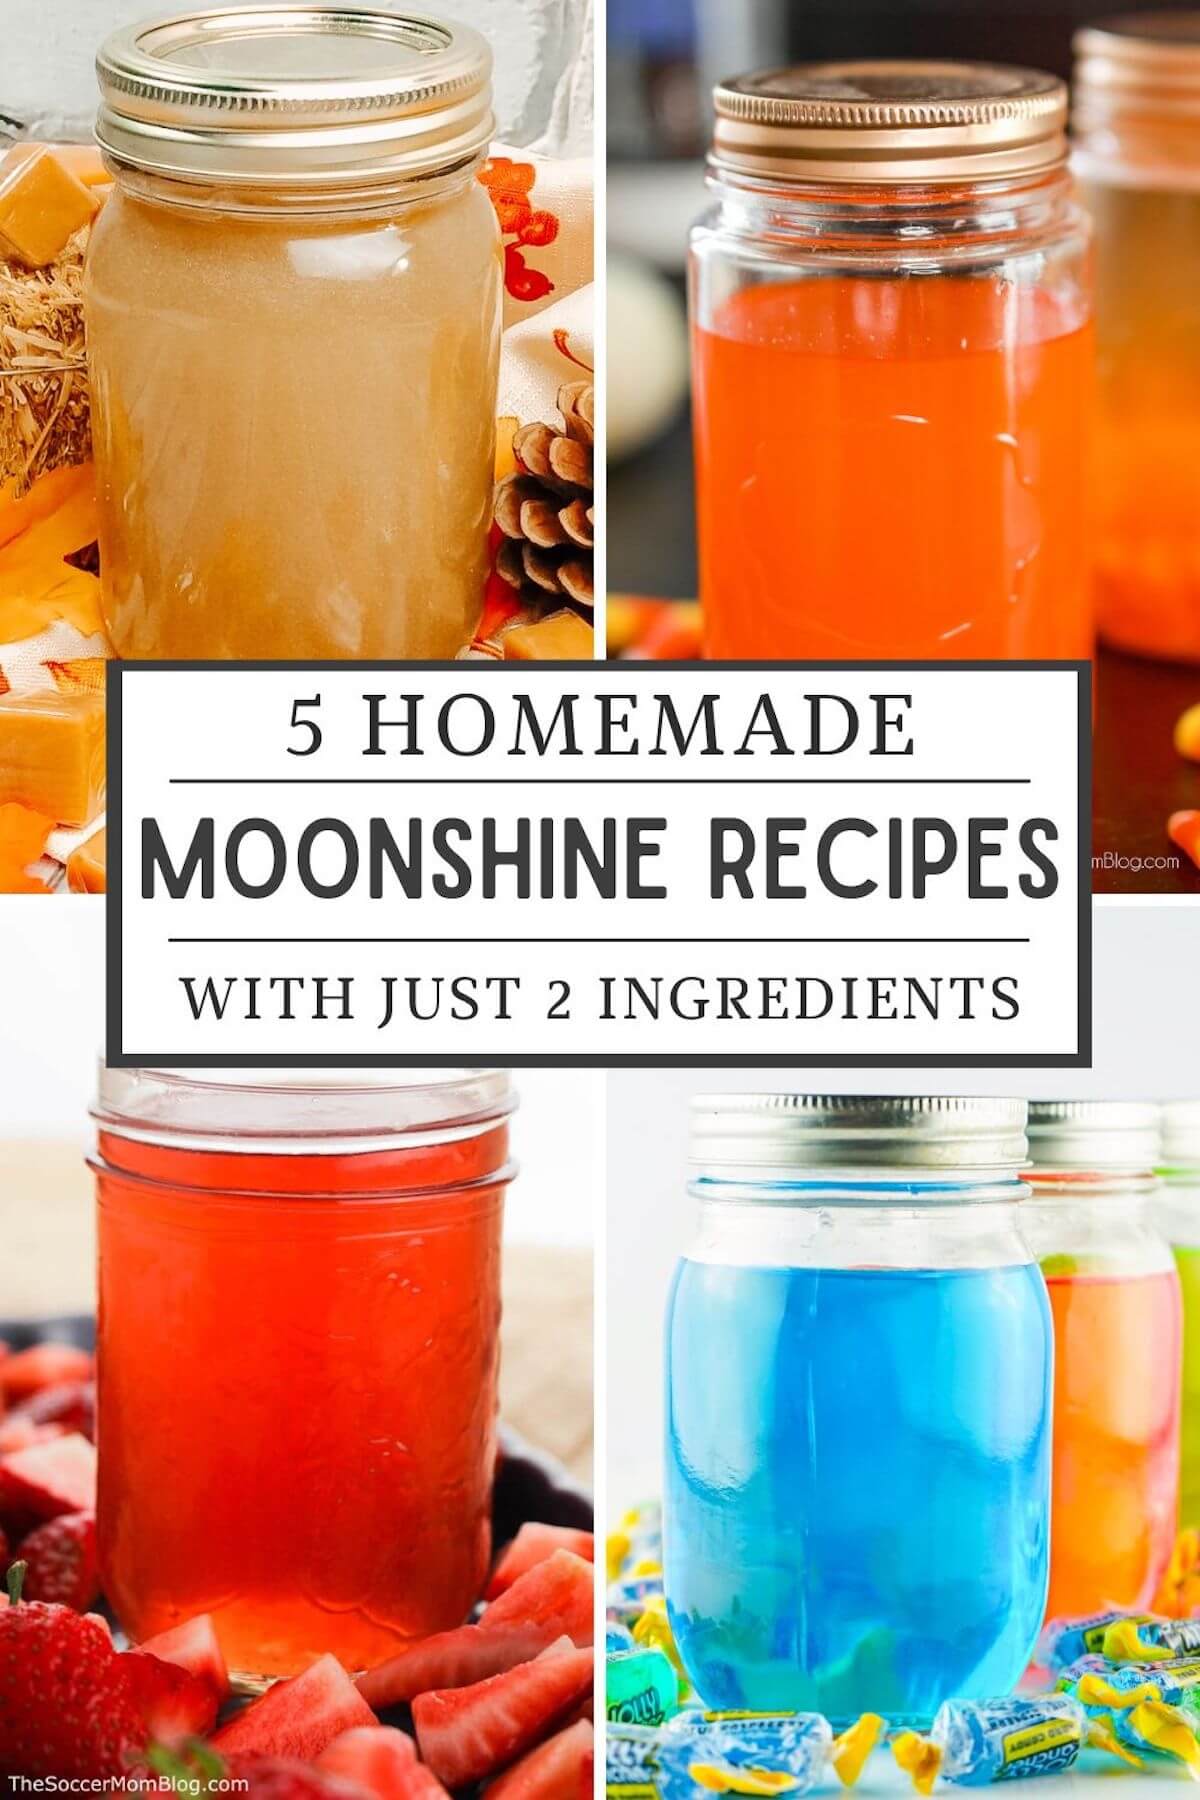 5 Homemade Moonshine Recipes With Only